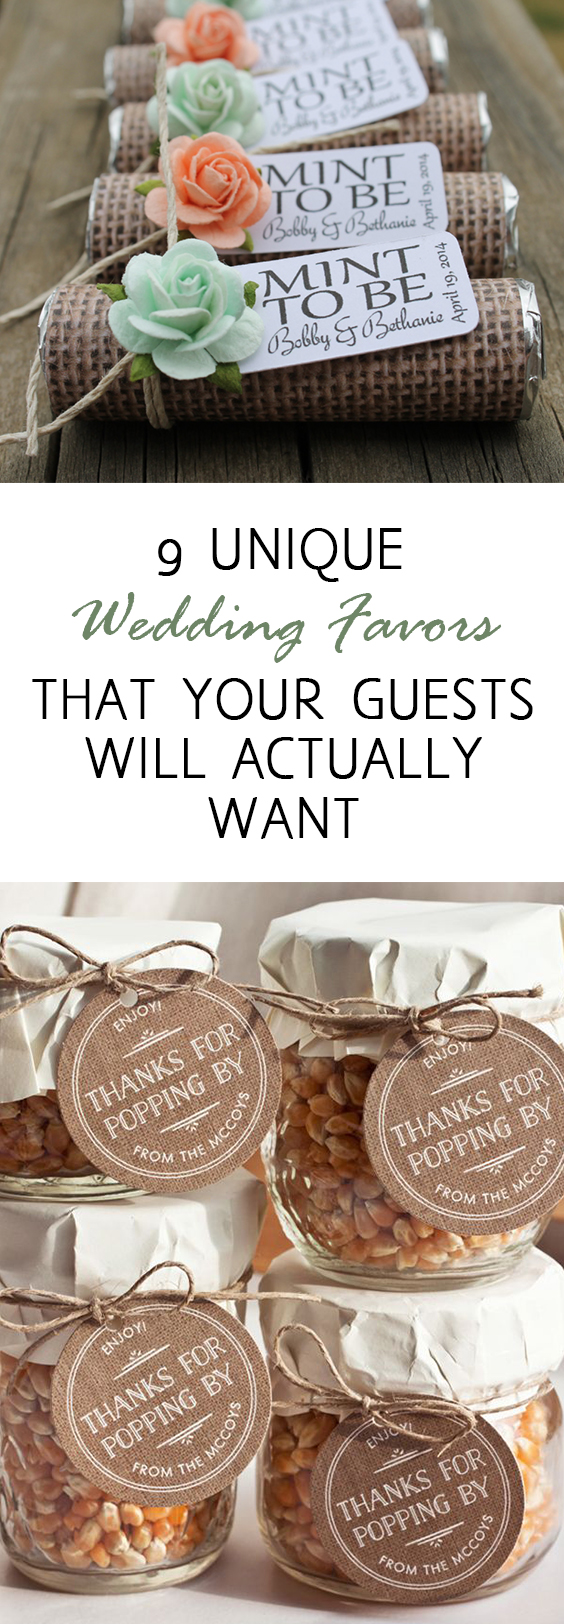 9 Unique Wedding Favors that Your Guests Will Actually Want ~ Oh My